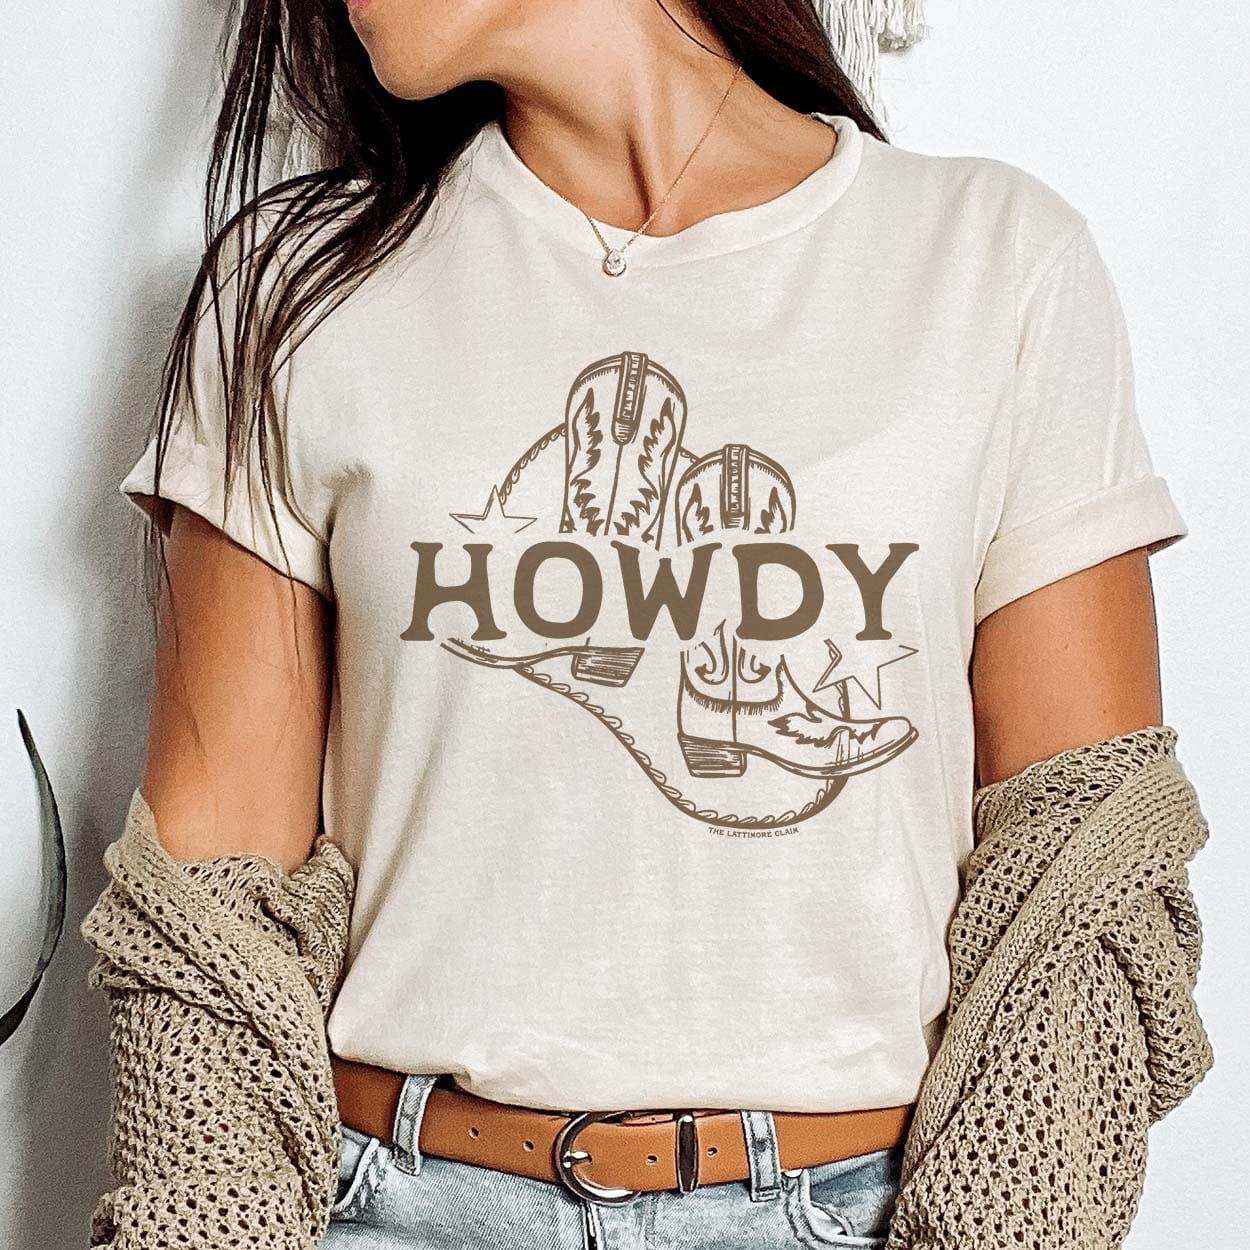 A cream colored short sleeve shirt with cuffed sleeves featuring a graphic of a pair of brown cowboy boots with the word "Howdy" running through the middle. There are brown stars on both the start and end of the text with an unsymmetrical line border going around the graphic. Item is pictured on a plain white background.